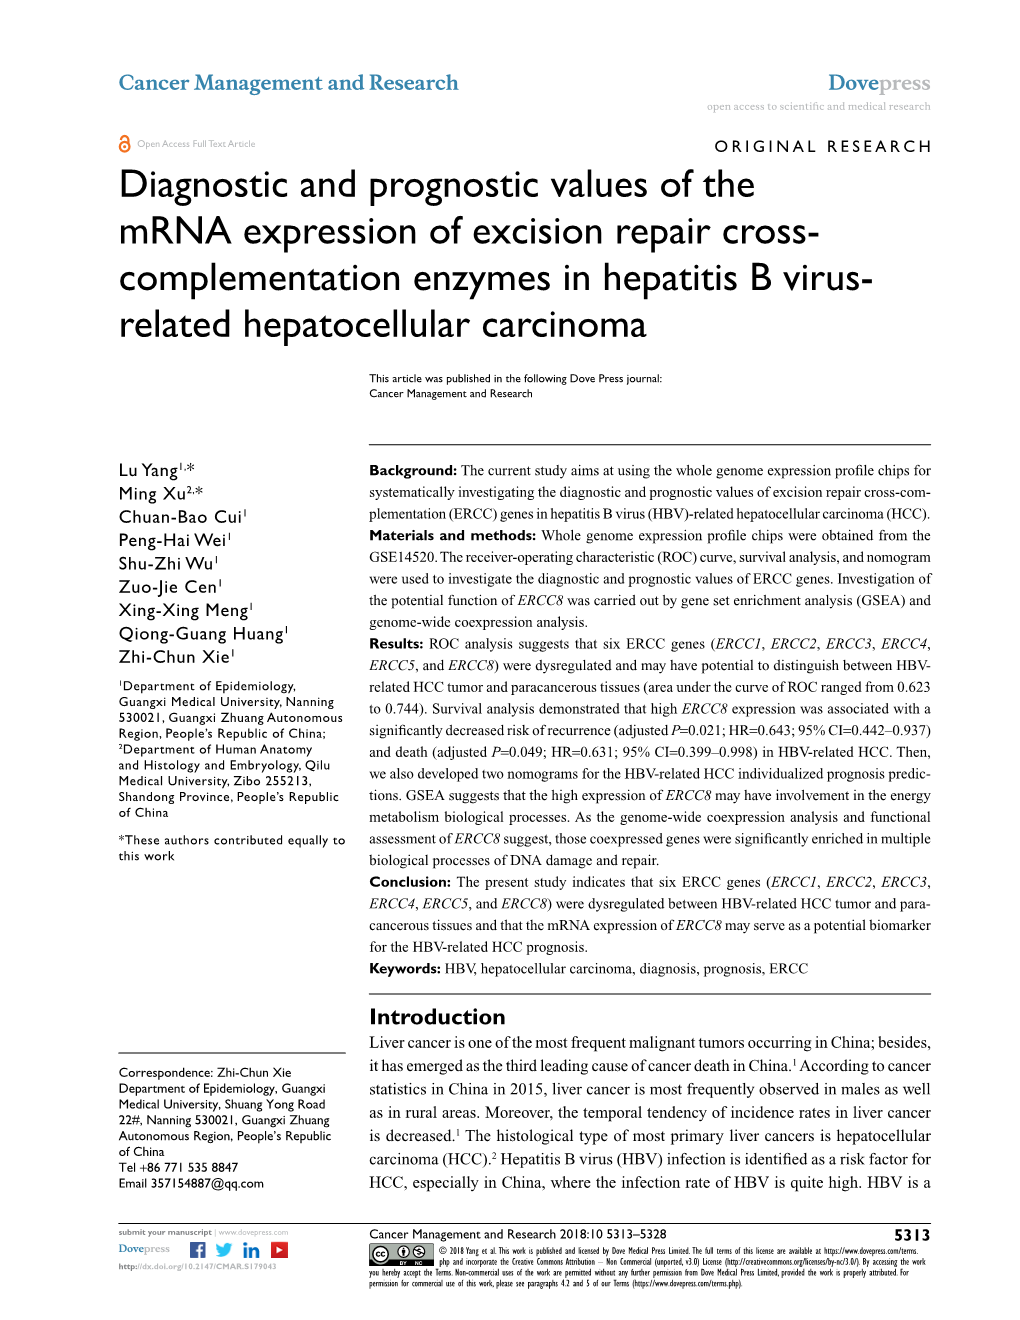 Diagnostic and Prognostic Values of the Mrna Expression of Excision Repair Cross- Complementation Enzymes in Hepatitis B Virus- Related Hepatocellular Carcinoma